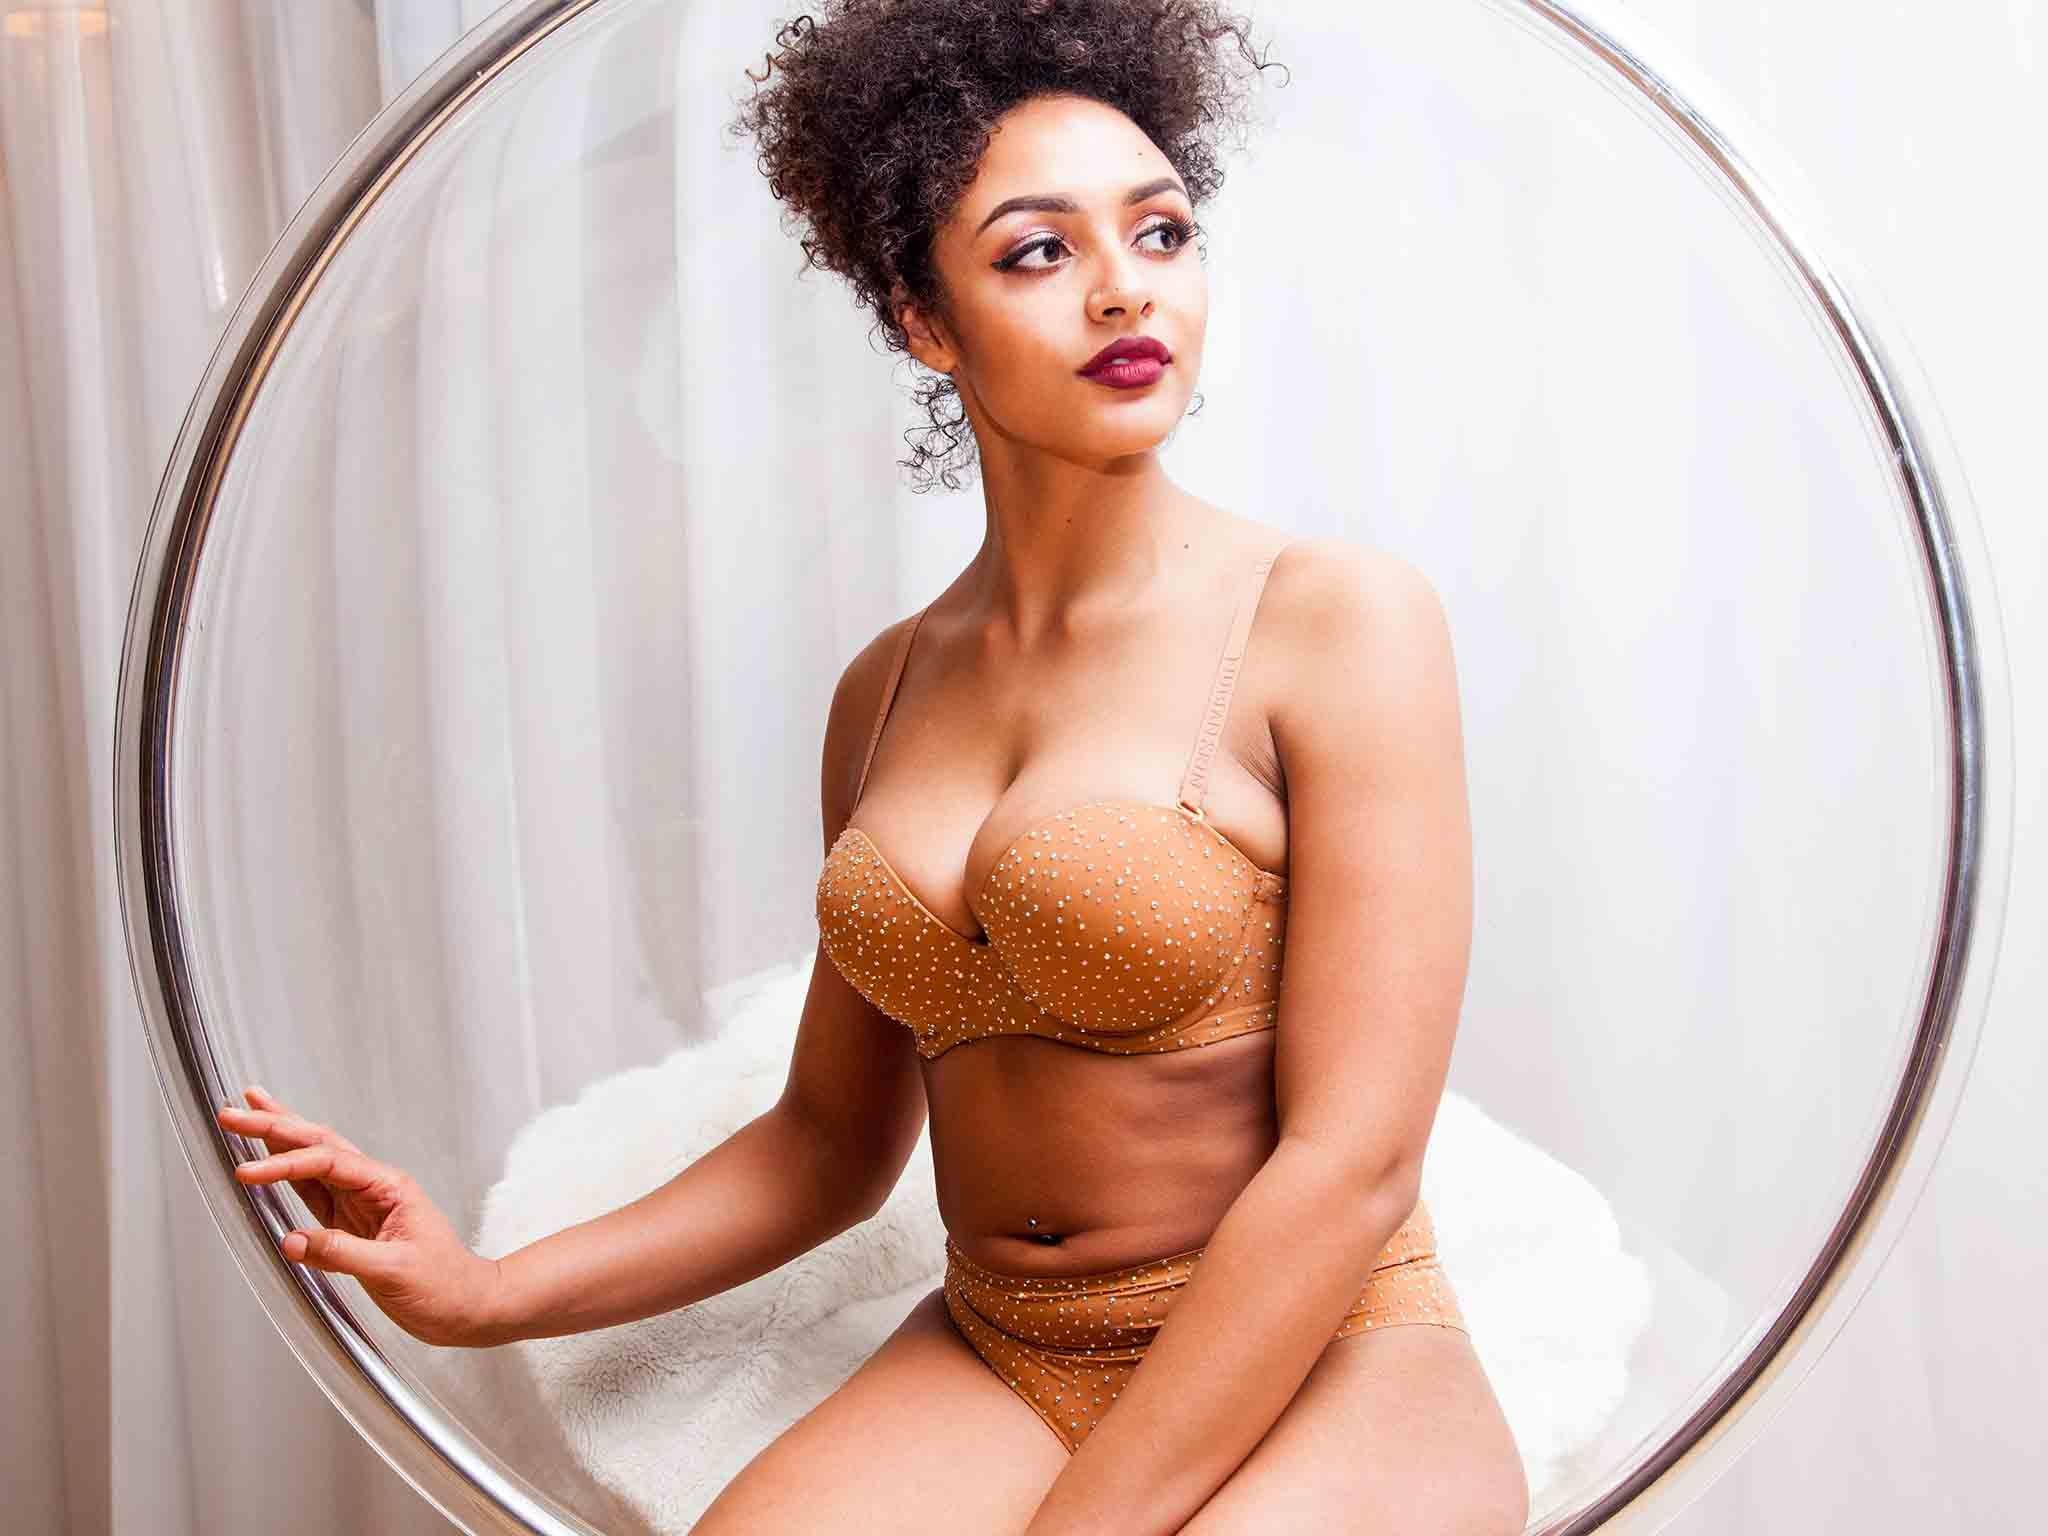 Nude underwear for all: Designers team up to make lingerie for women of  every colour, The Independent